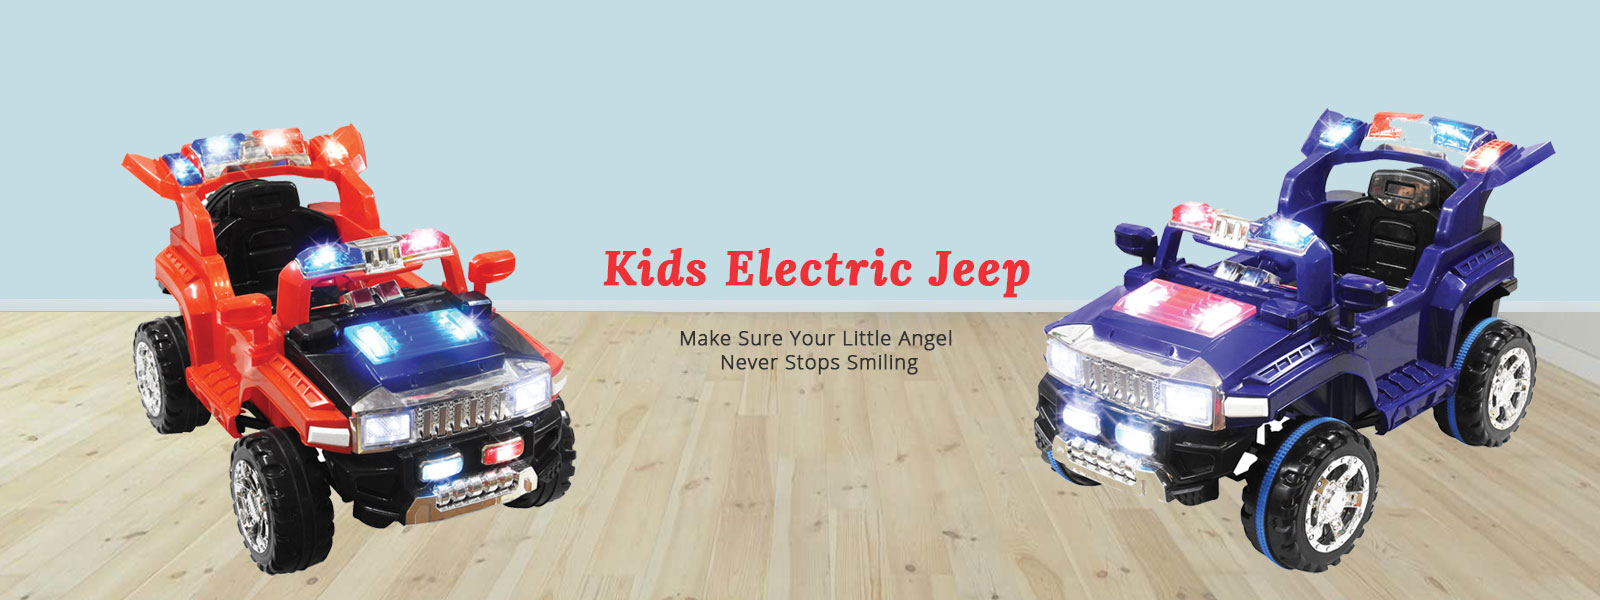 Kids Electric Jeep Manufacturers in Raipur